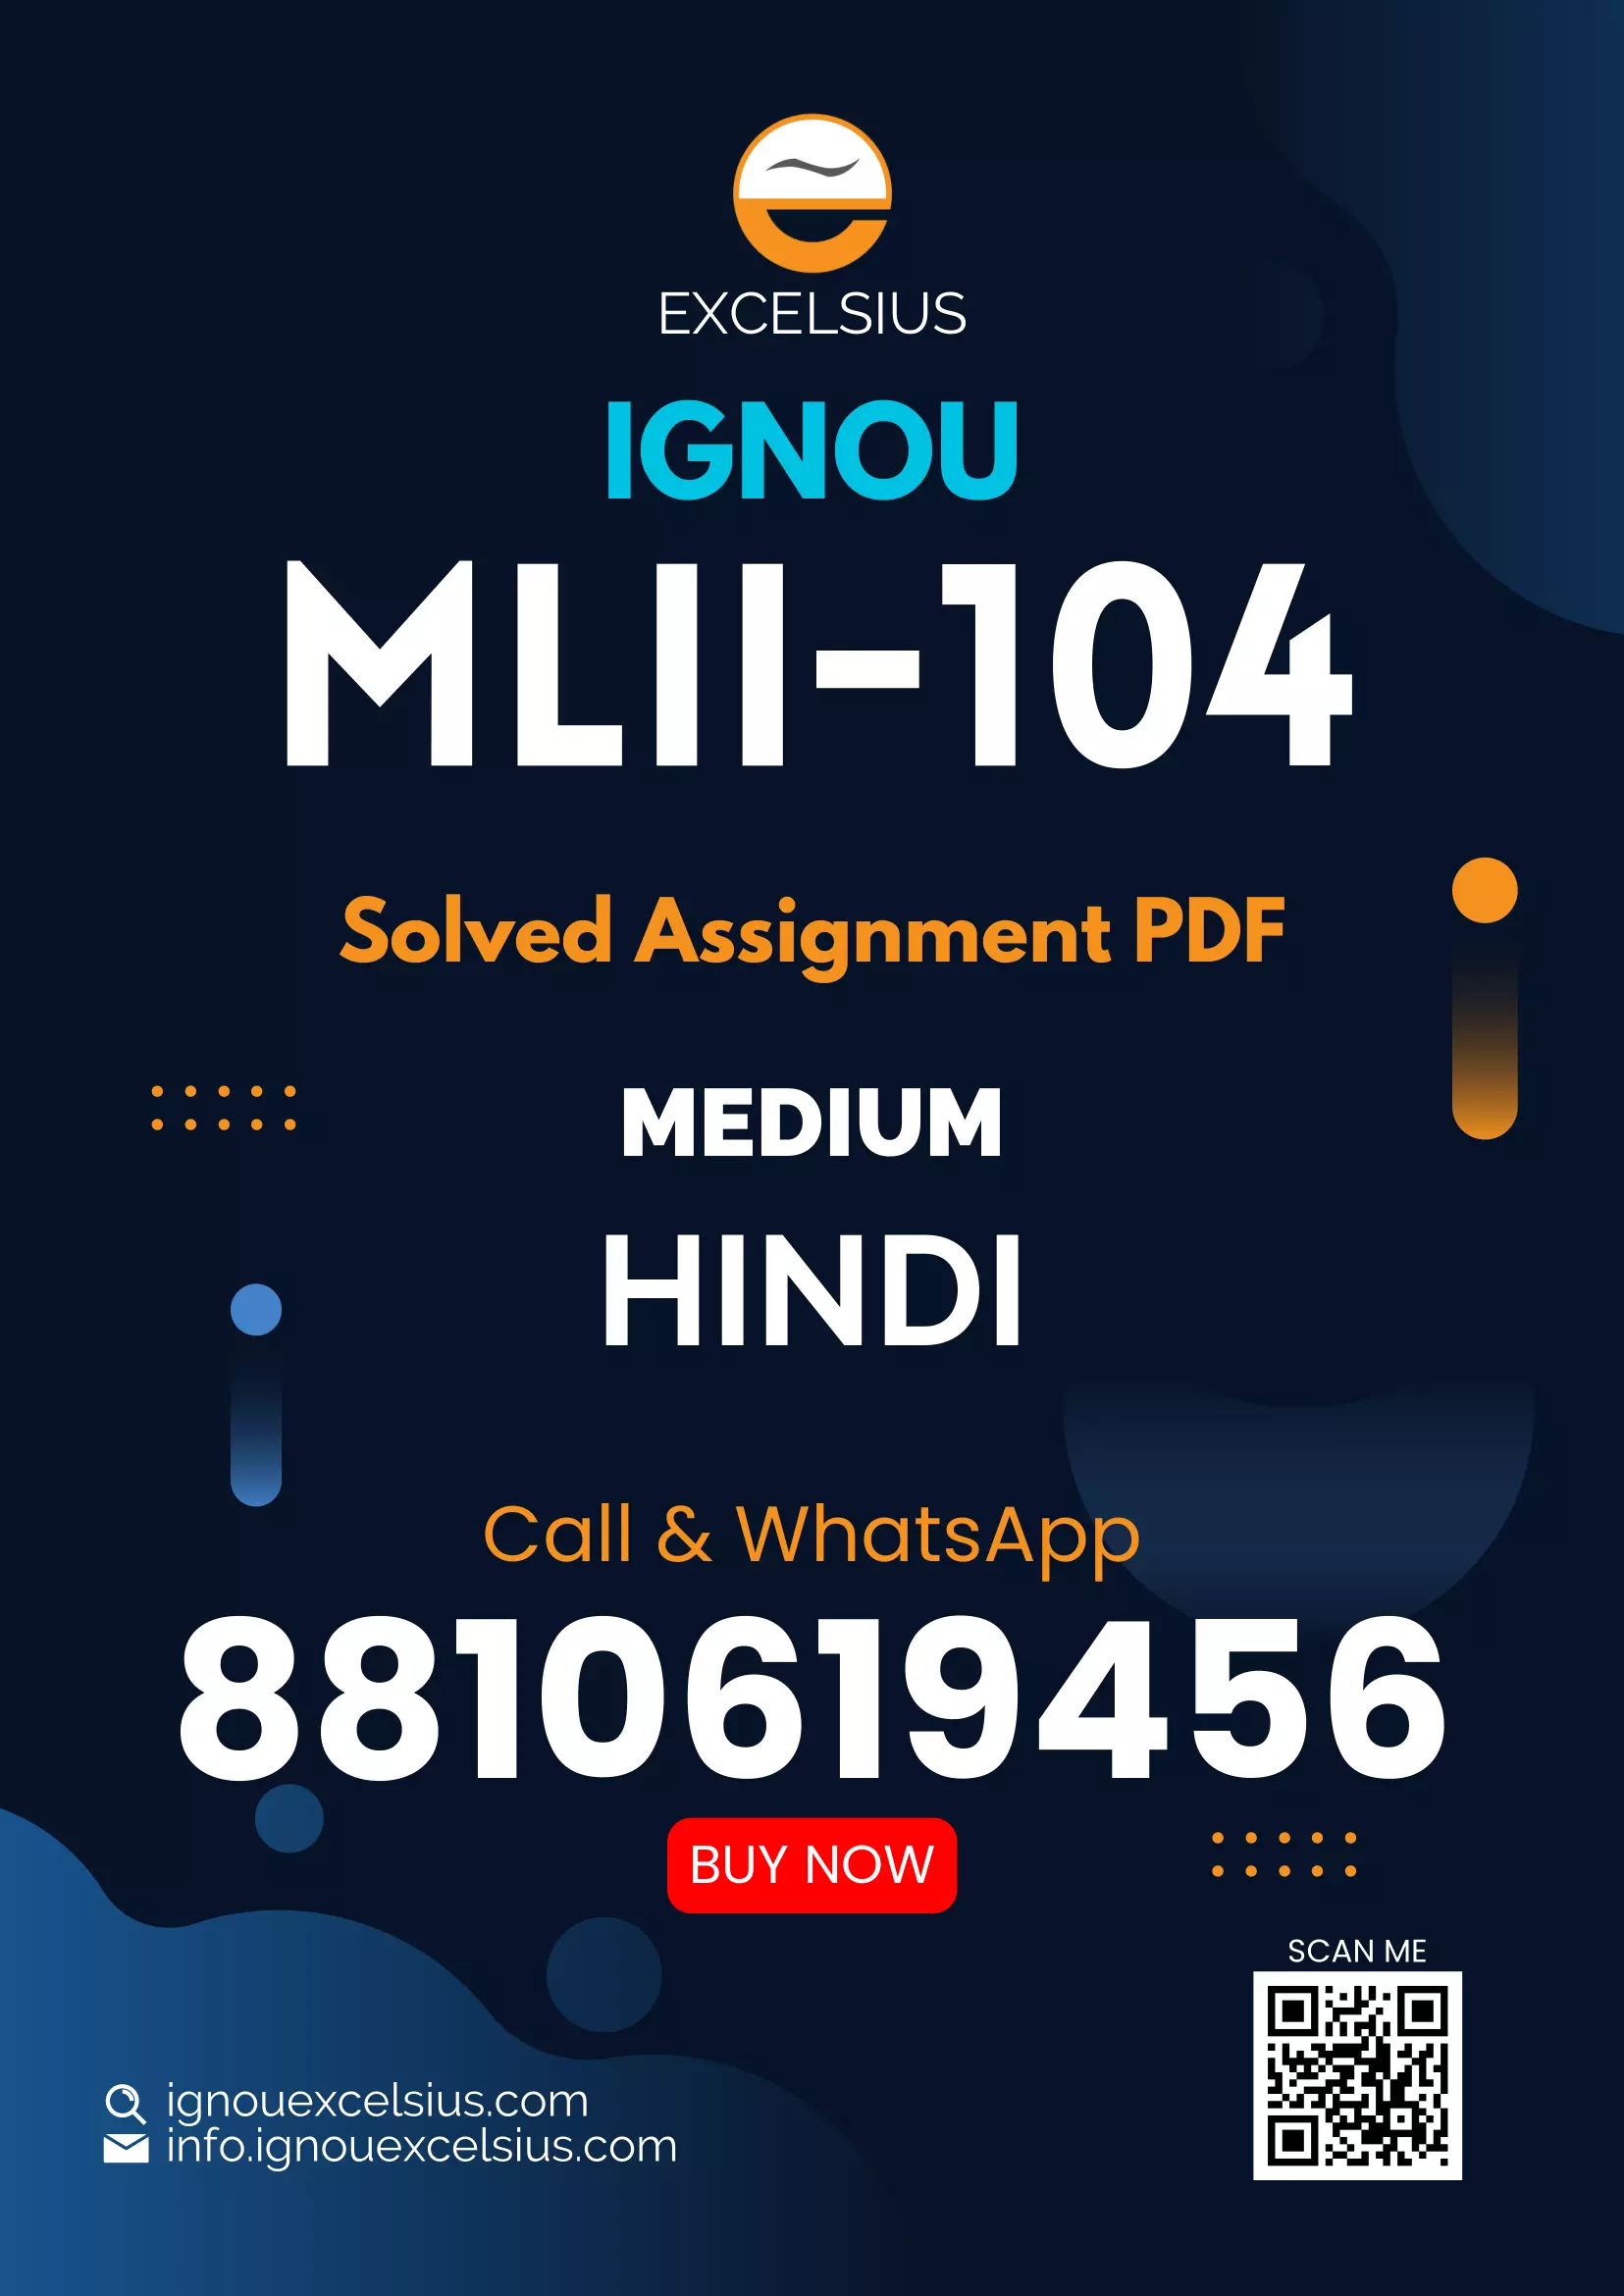 IGNOU MLII-104 - Information Communication Technologies: Applications, Latest Solved Assignment-July 2022 – January 2023